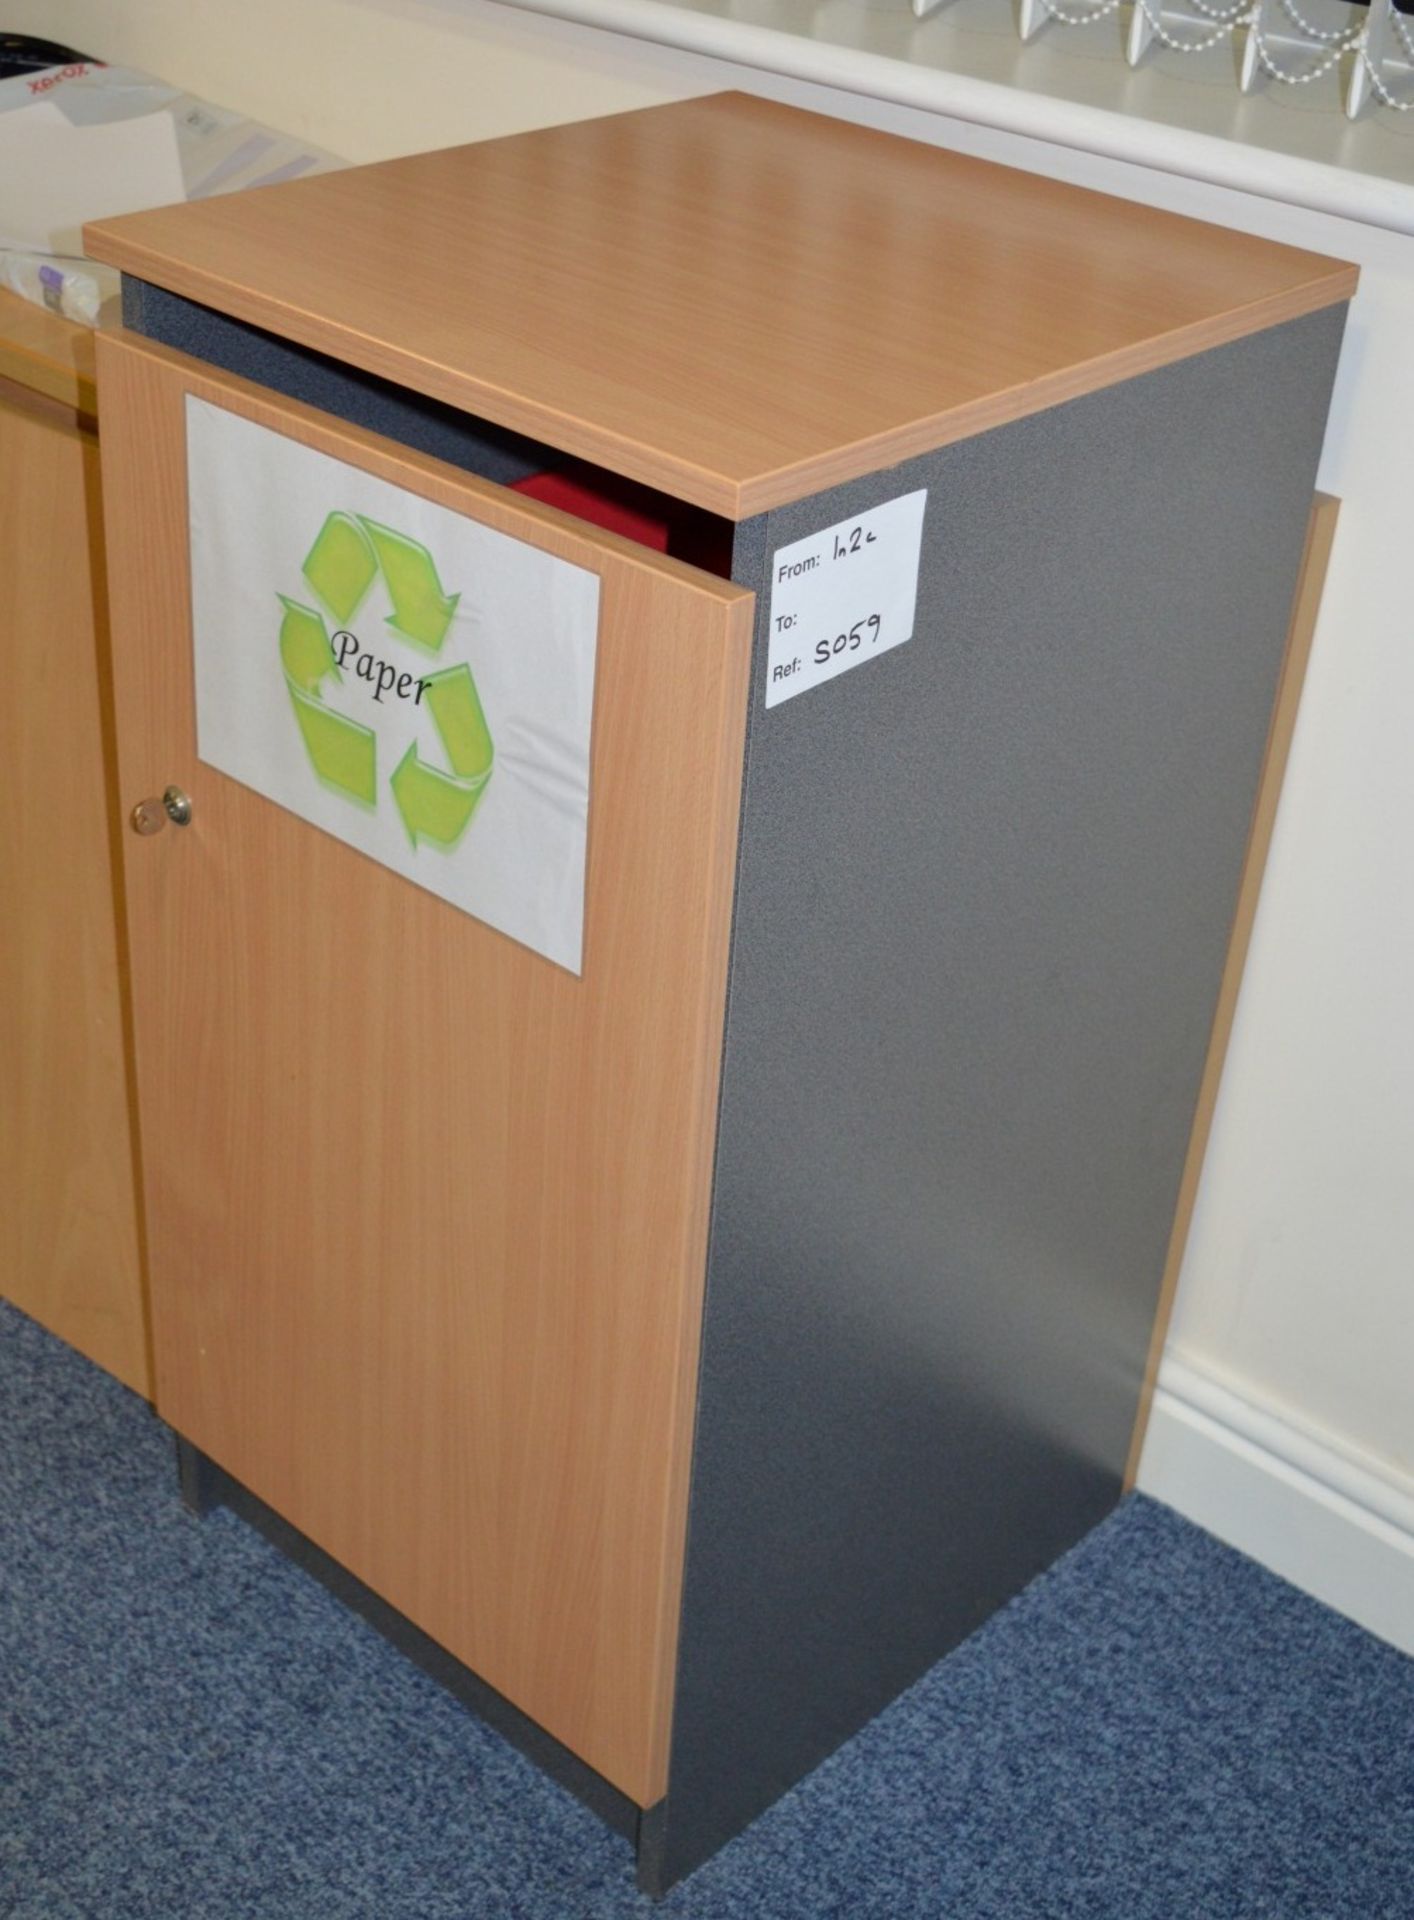 1 x Office Waste Cabinet - Moden Grey and Beech Finish - Ideal For Containing Waste Paper - Includes - Image 2 of 2